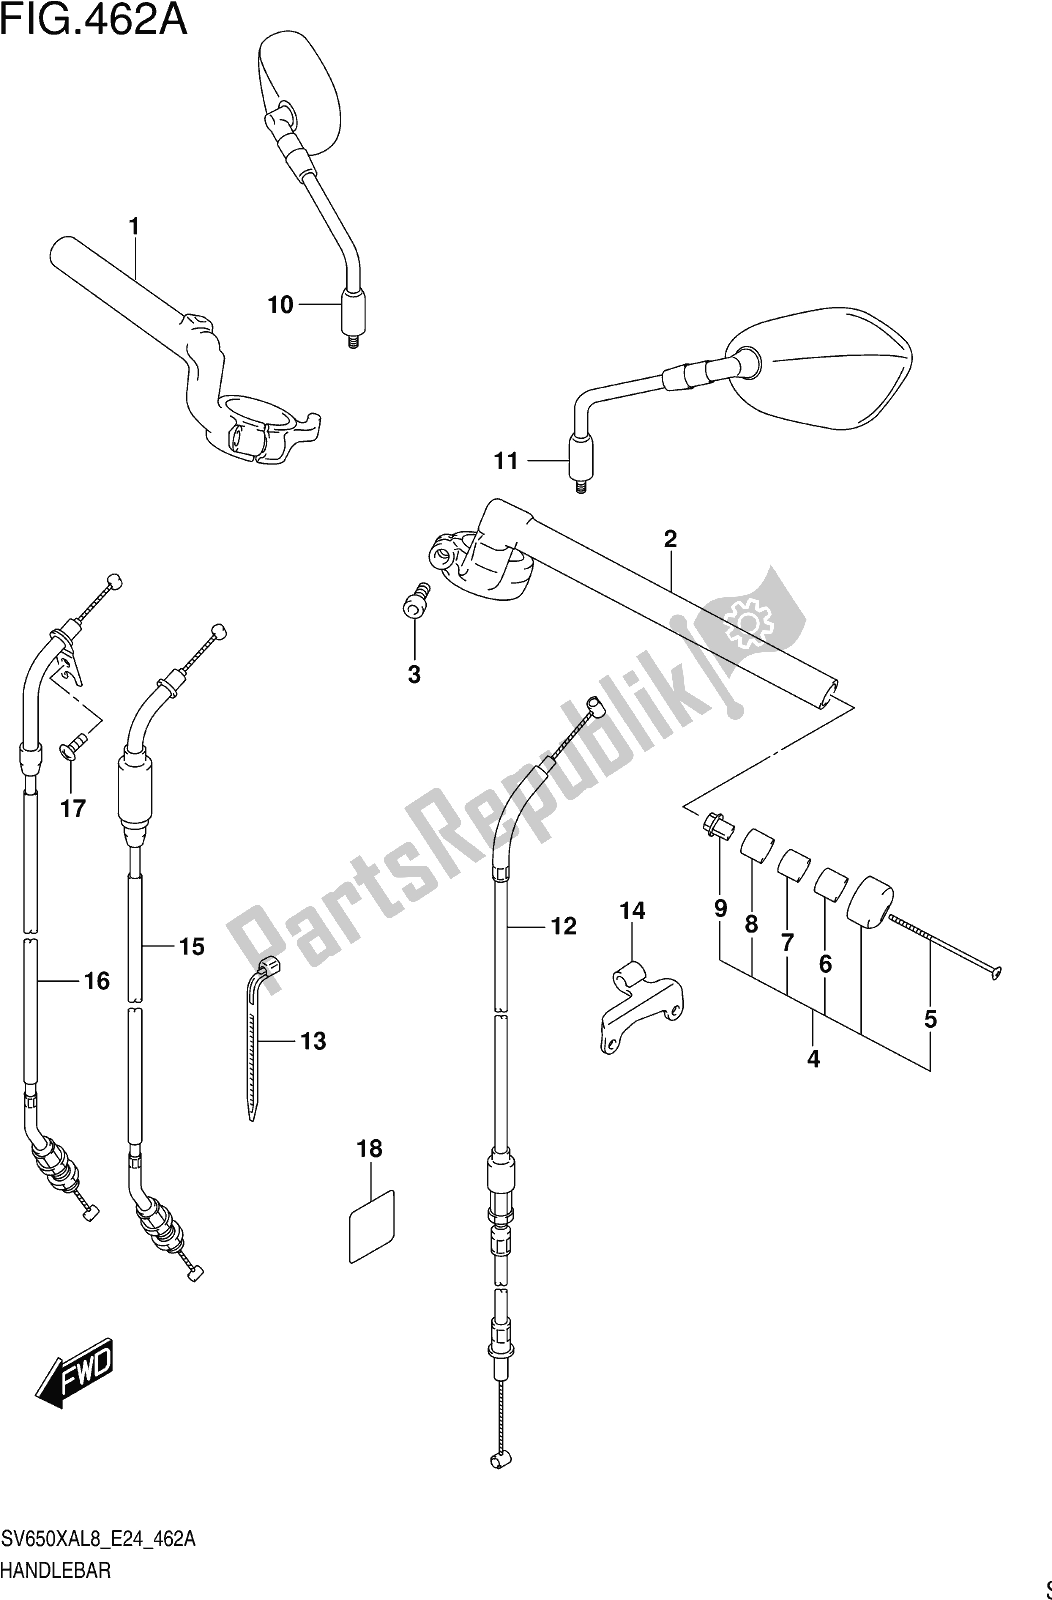 All parts for the Fig. 462a Handlebar of the Suzuki SV 650 XA 2018